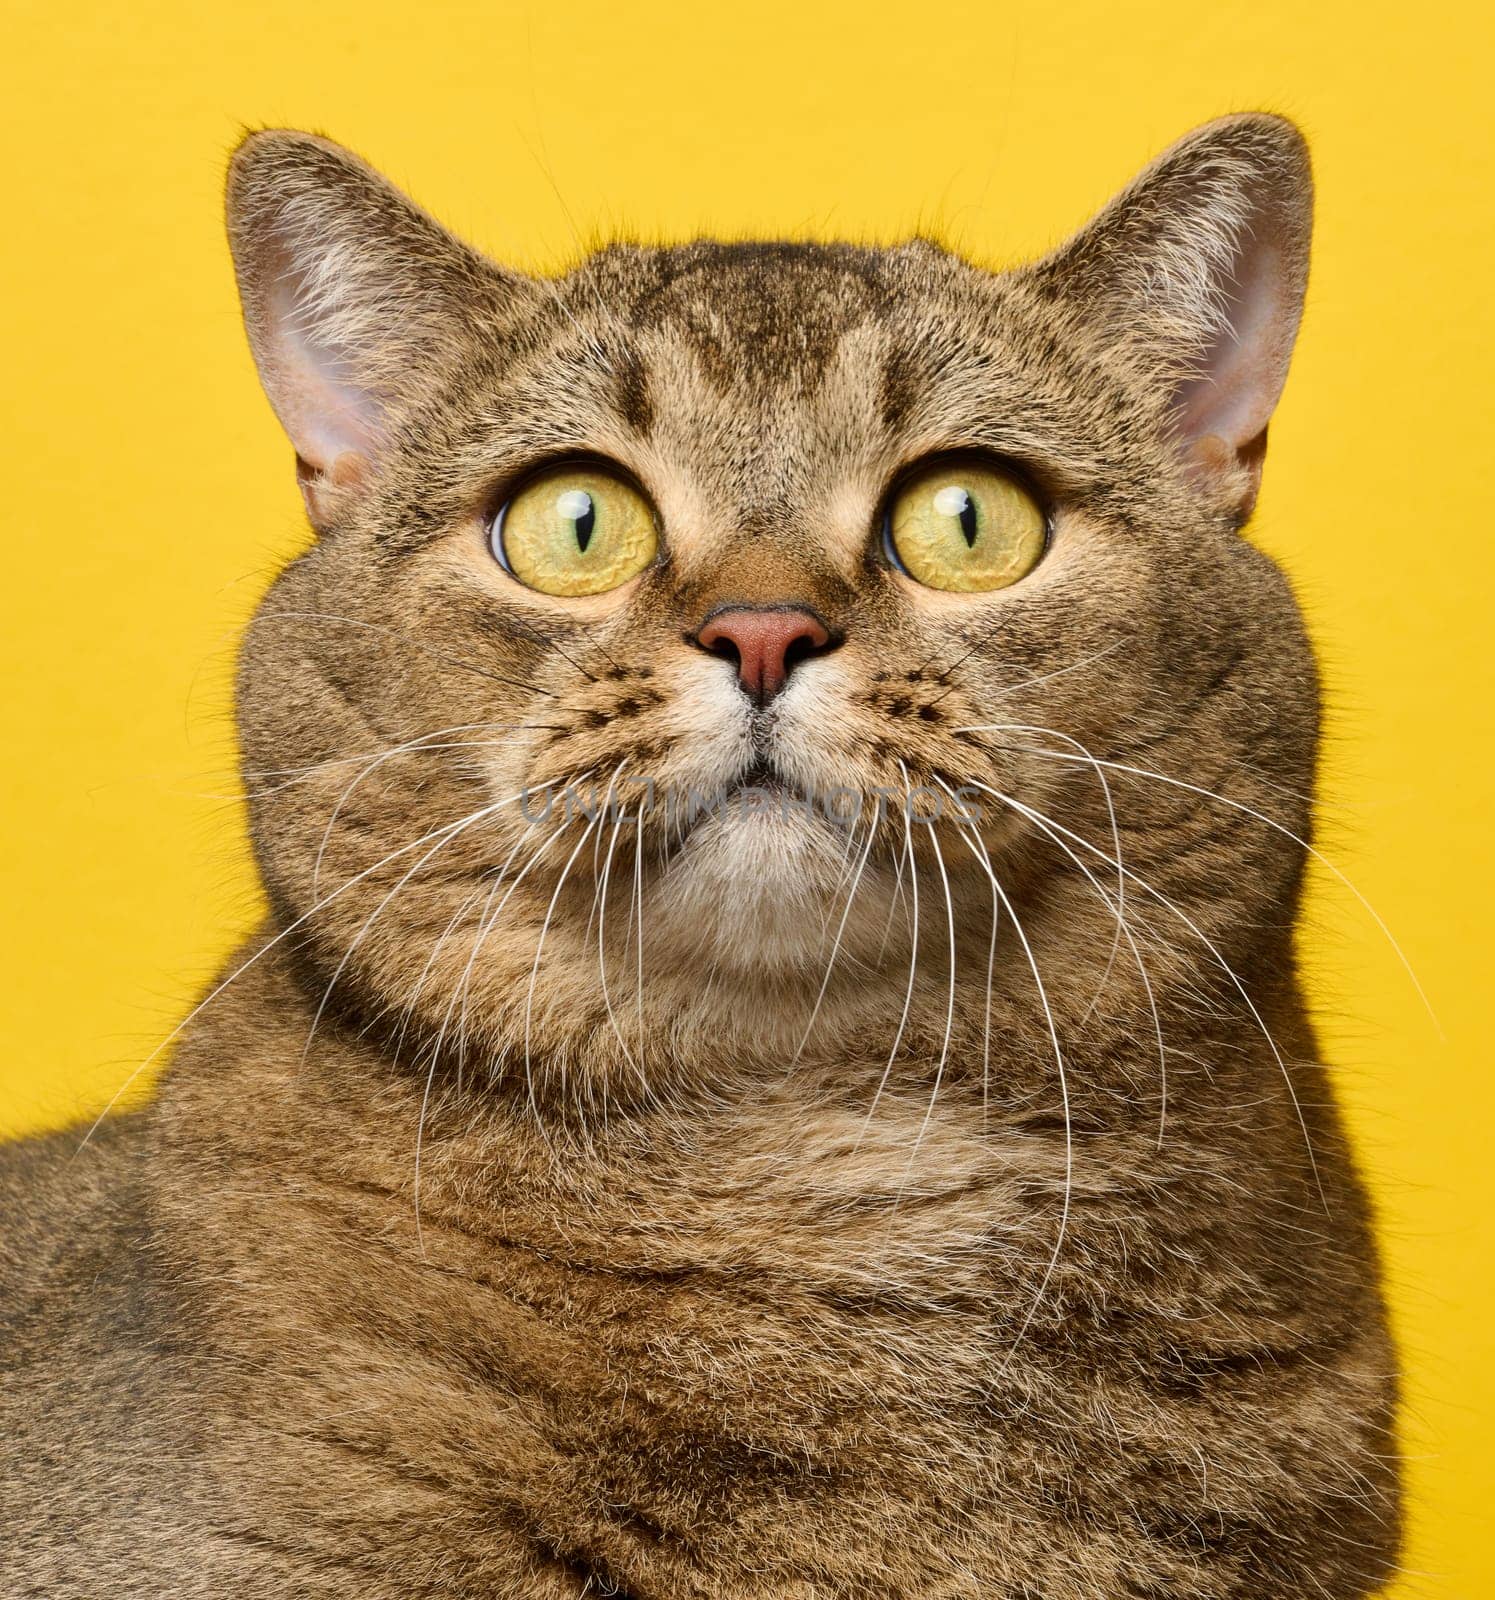 A cute adult straight-eared Scottish breed gray cat on a yellow background by ndanko